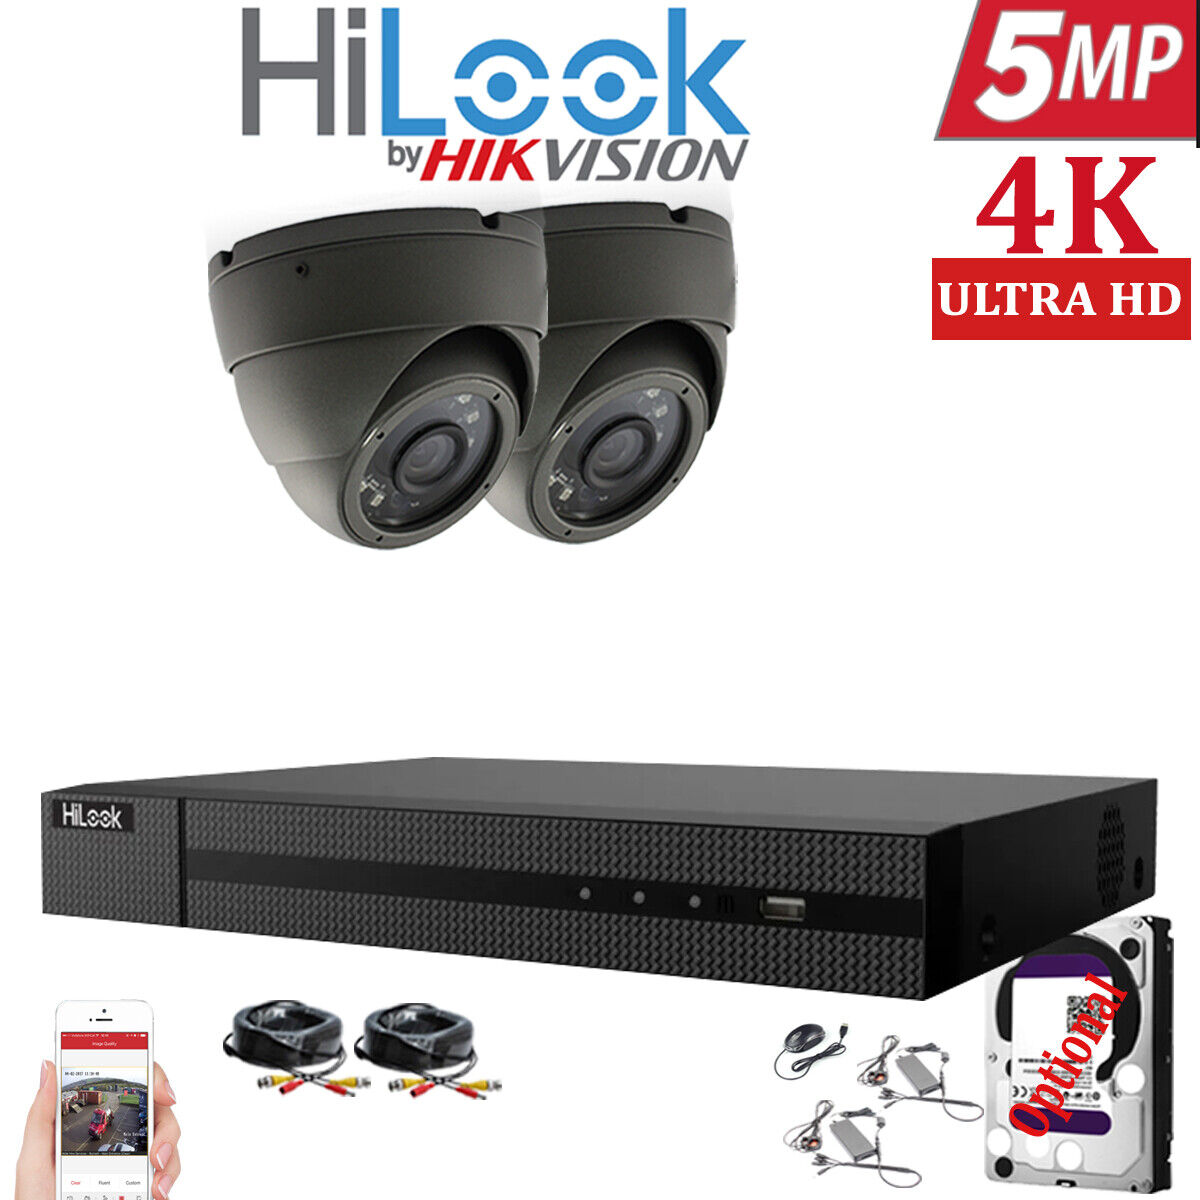 HIKVISION HILOOK 5MP CCTV SYSTEM 4CH DVR FULL HD 20M NIGHT VISION DOME CAMERAS 2x Cameras (Grey) 2TB HDD